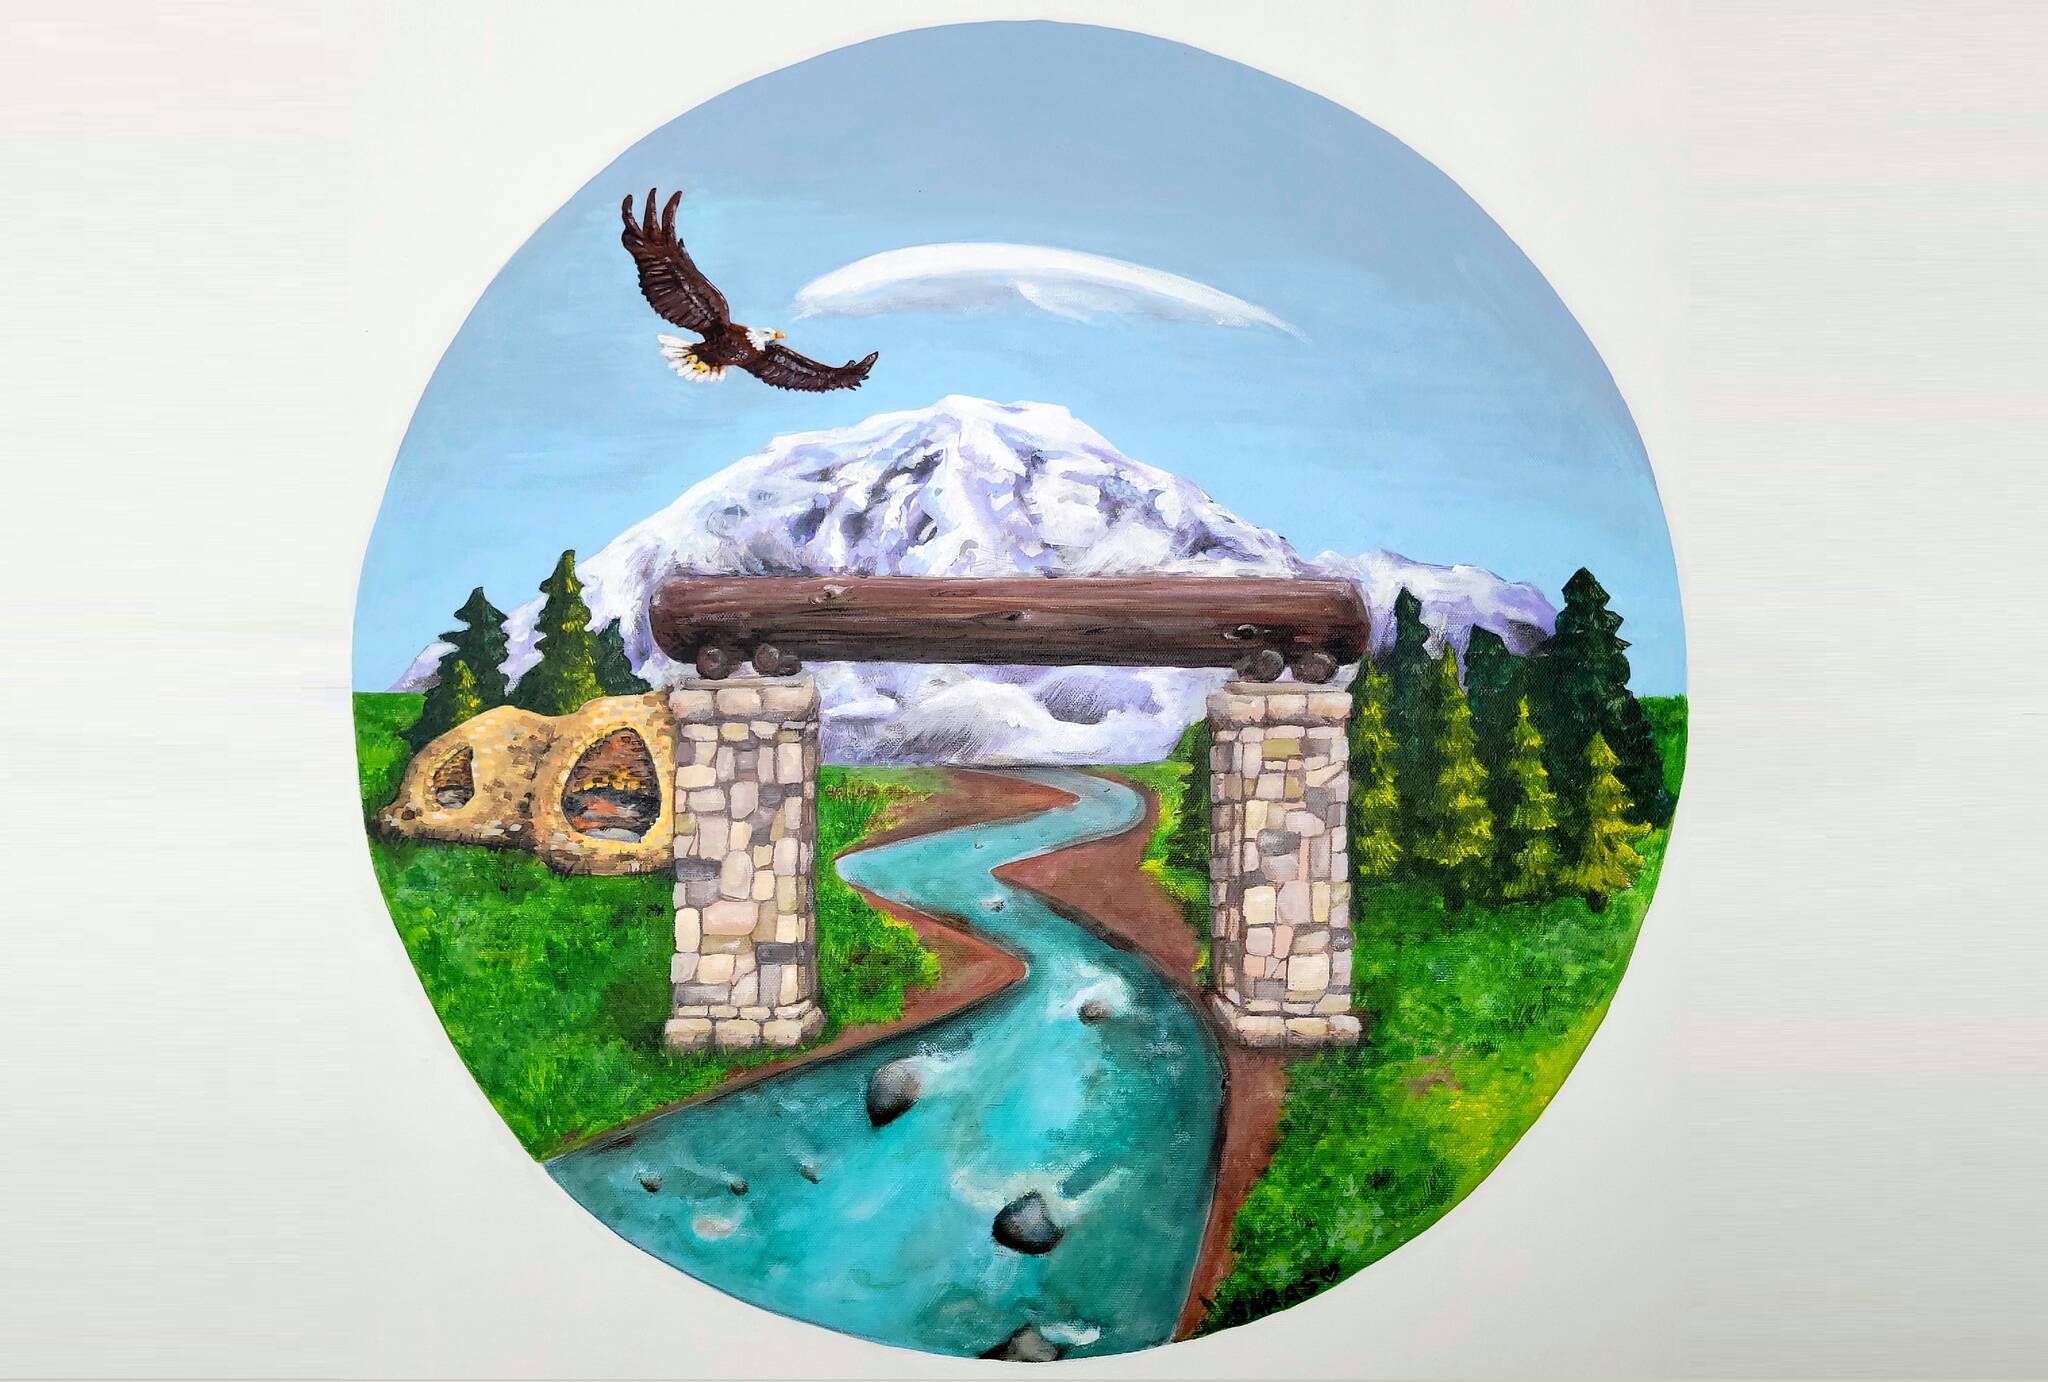 Historic Wilkeson. Logo concept with the Carbon River Cooridor beginning at the Glacier Gate and extending to Mount Rainier. (Acrylic on canvas, by Sara Sutterfield. Submitted to Town of Wilkeson June 16th, 2022.)